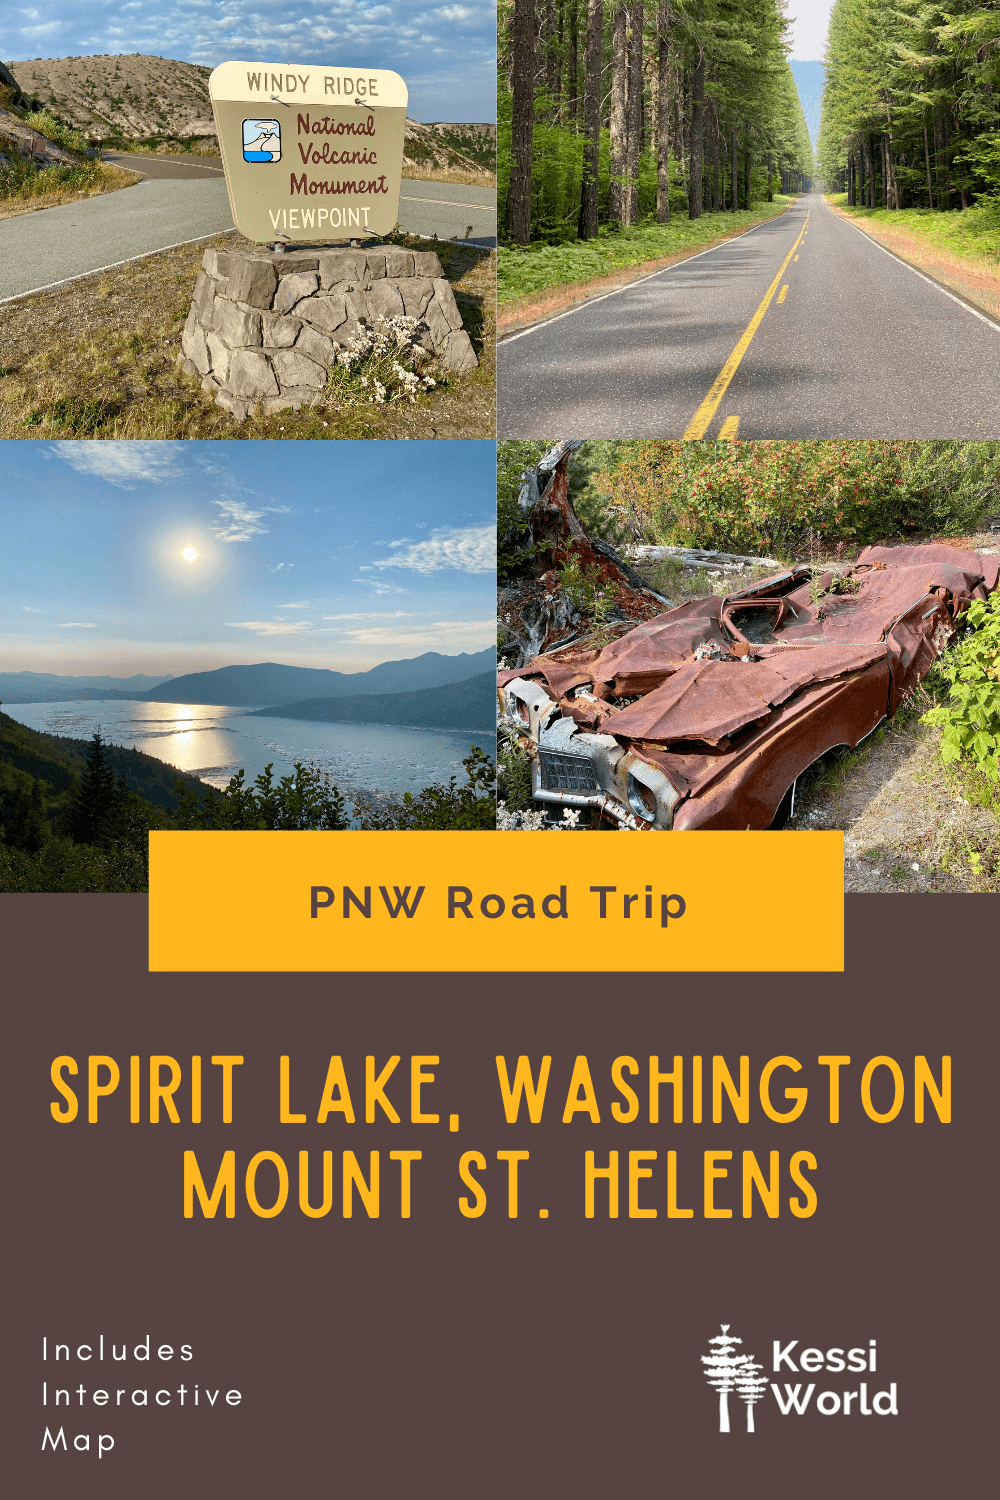 This Pinterest Pin talks about a Pacific Northwest Road Trip to Spirit Lake, Washington, which cuts through Mount St. Helens. The colors are brown and yellow and there are four small square photos of various natural features on the itinerary.